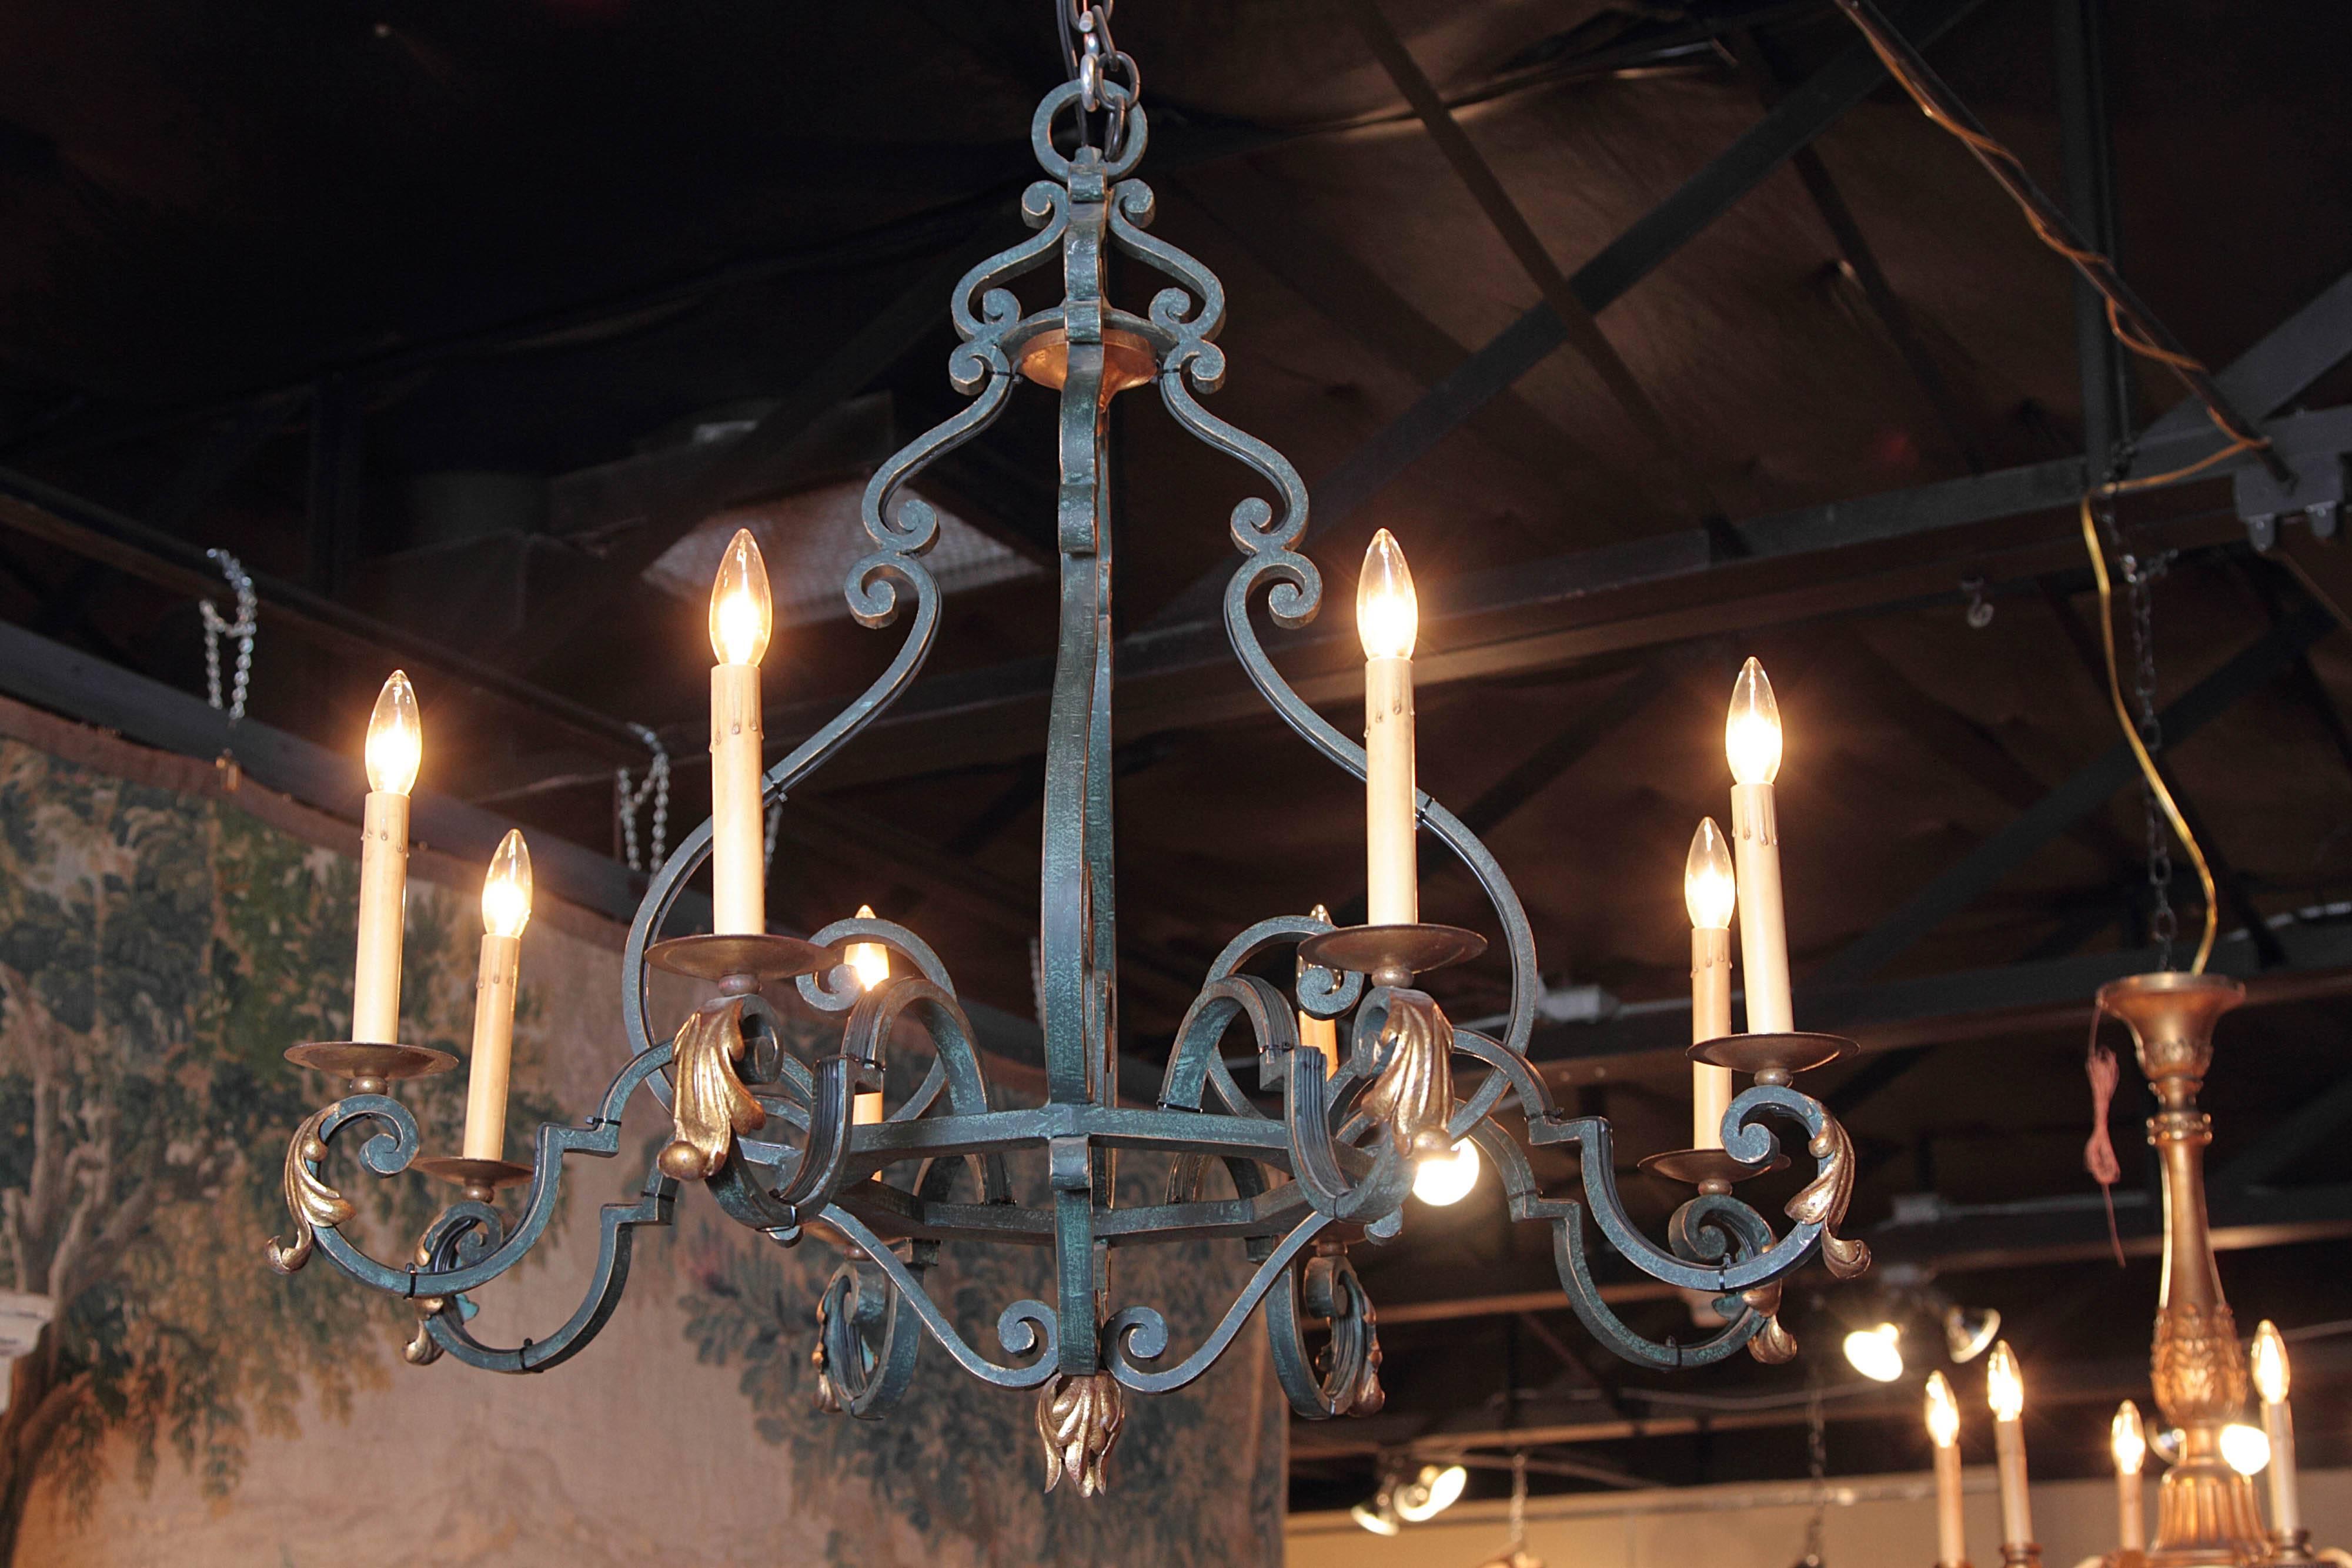 ad French touch to your breakfast room ceiling with his elegant wrought iron chandelier; crafted in France, circa 1940, the fixture has a slim profile that creates an antique, yet surprisingly contemporary look. The scrolling base features eight